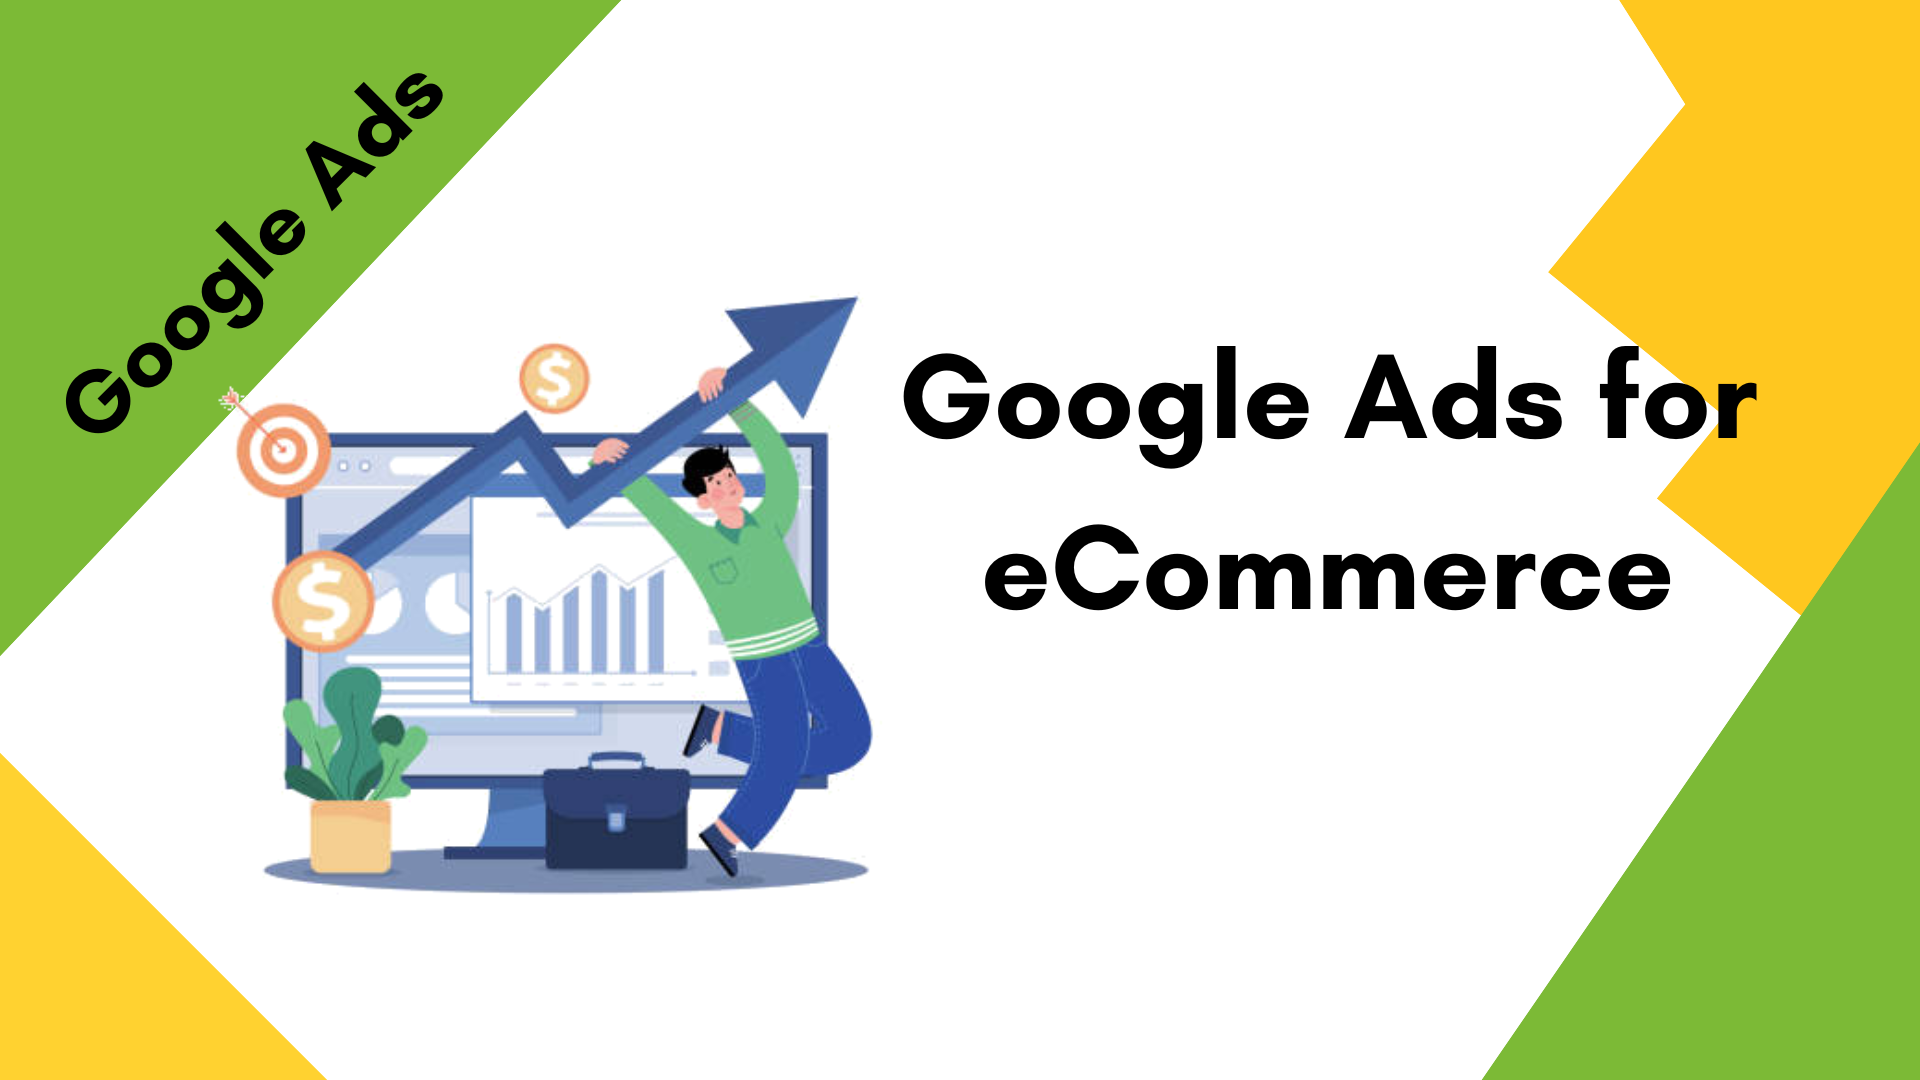 Google Ads for eCommerce: 9 Steps to Start Increasing Online Sales